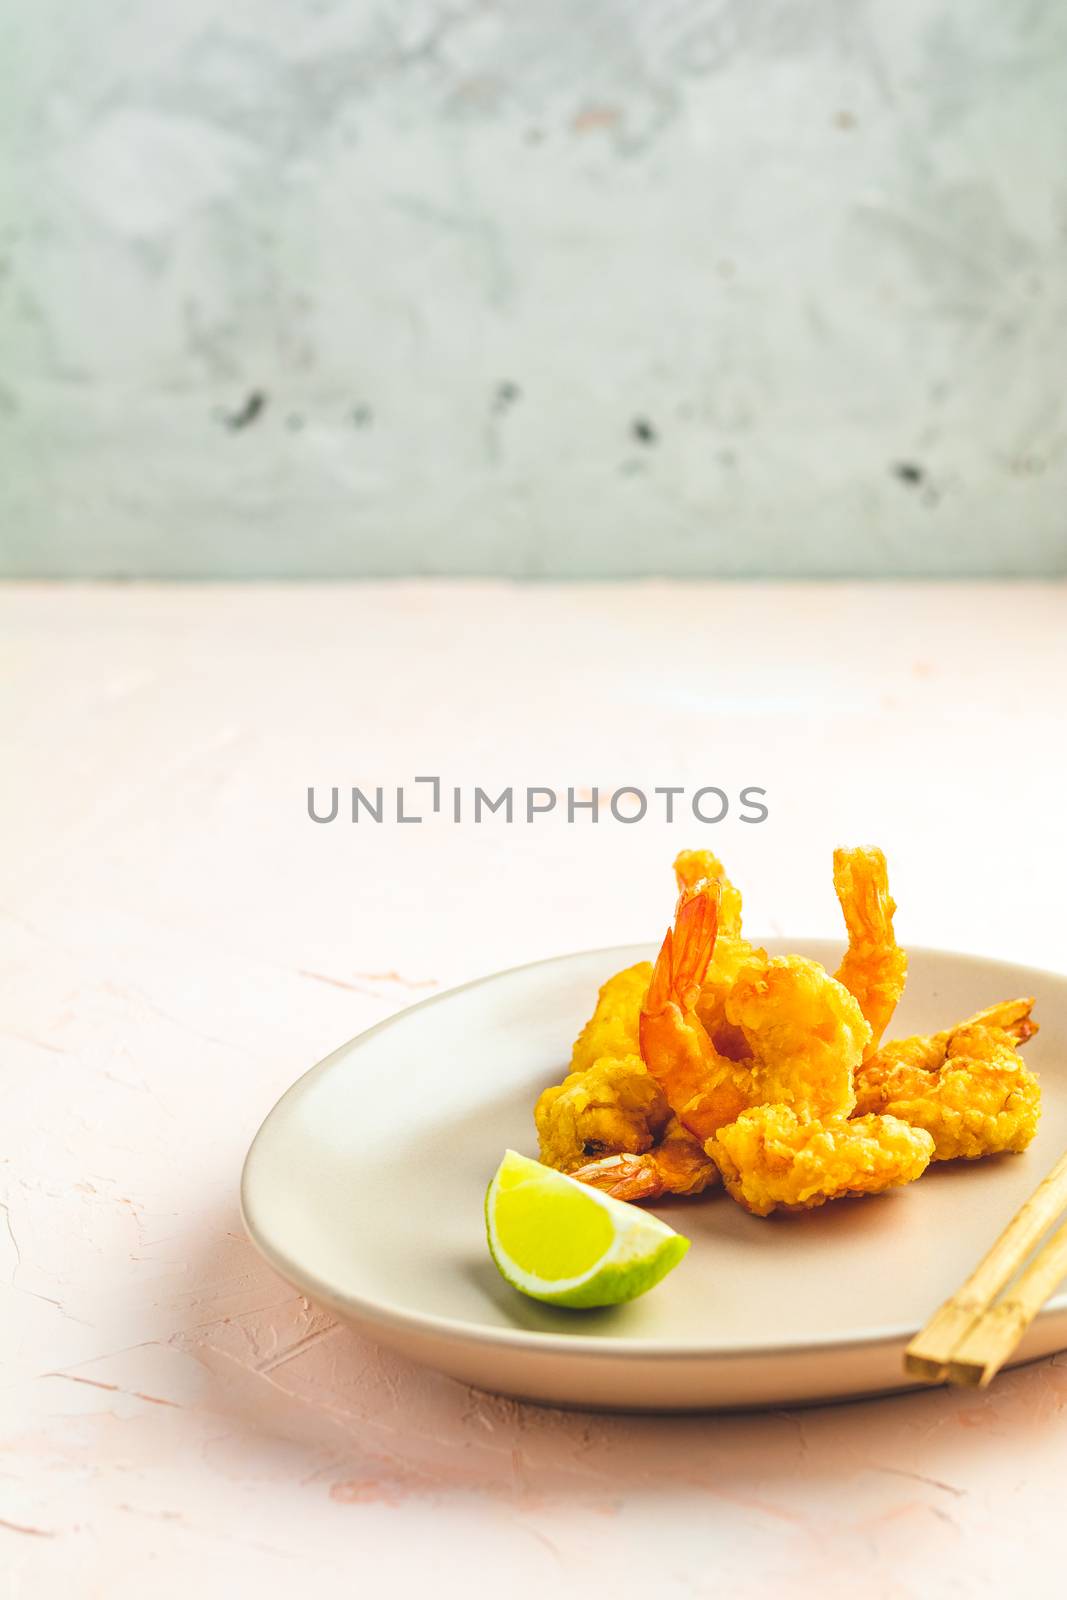 Fried Shrimps tempura in light plate on pink or peach concrete surface background. Copy space for you text. Seafood tempura dish of traditional asian cuisine.